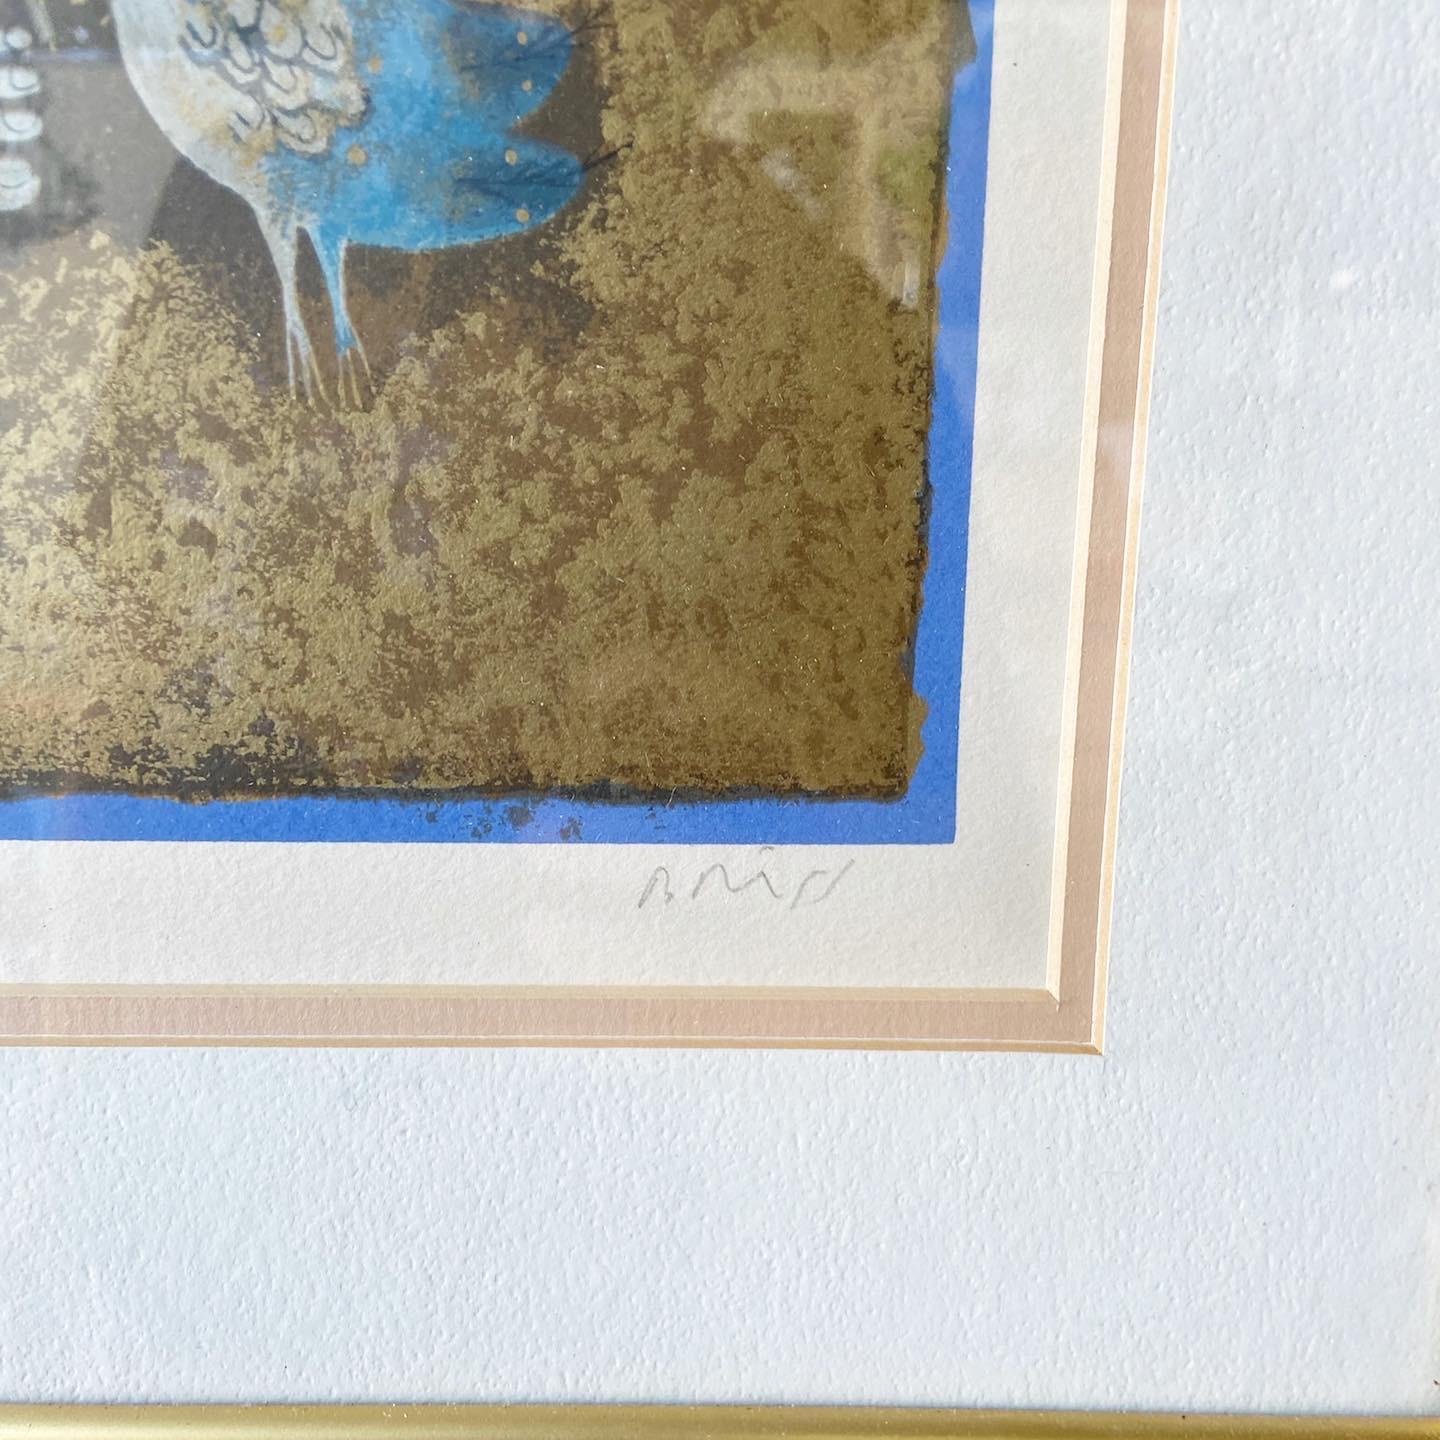 Framed and Signed Lithograph by Sam Briss In Good Condition For Sale In Delray Beach, FL